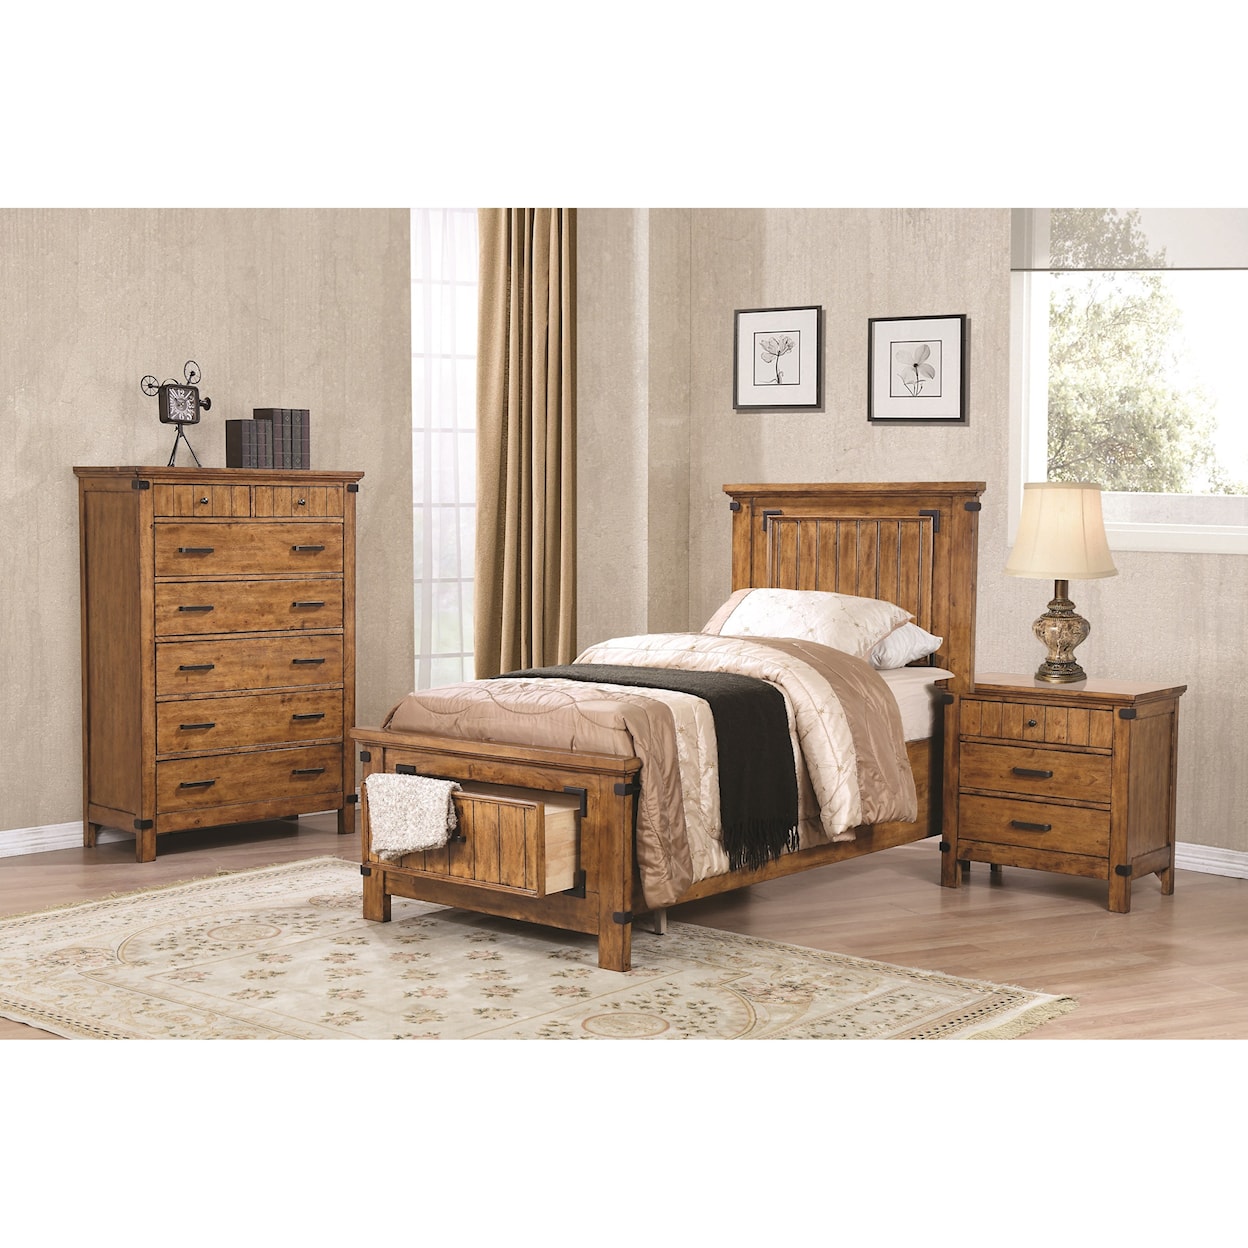 Coaster Brenner 7PC Twin Bedroom Group